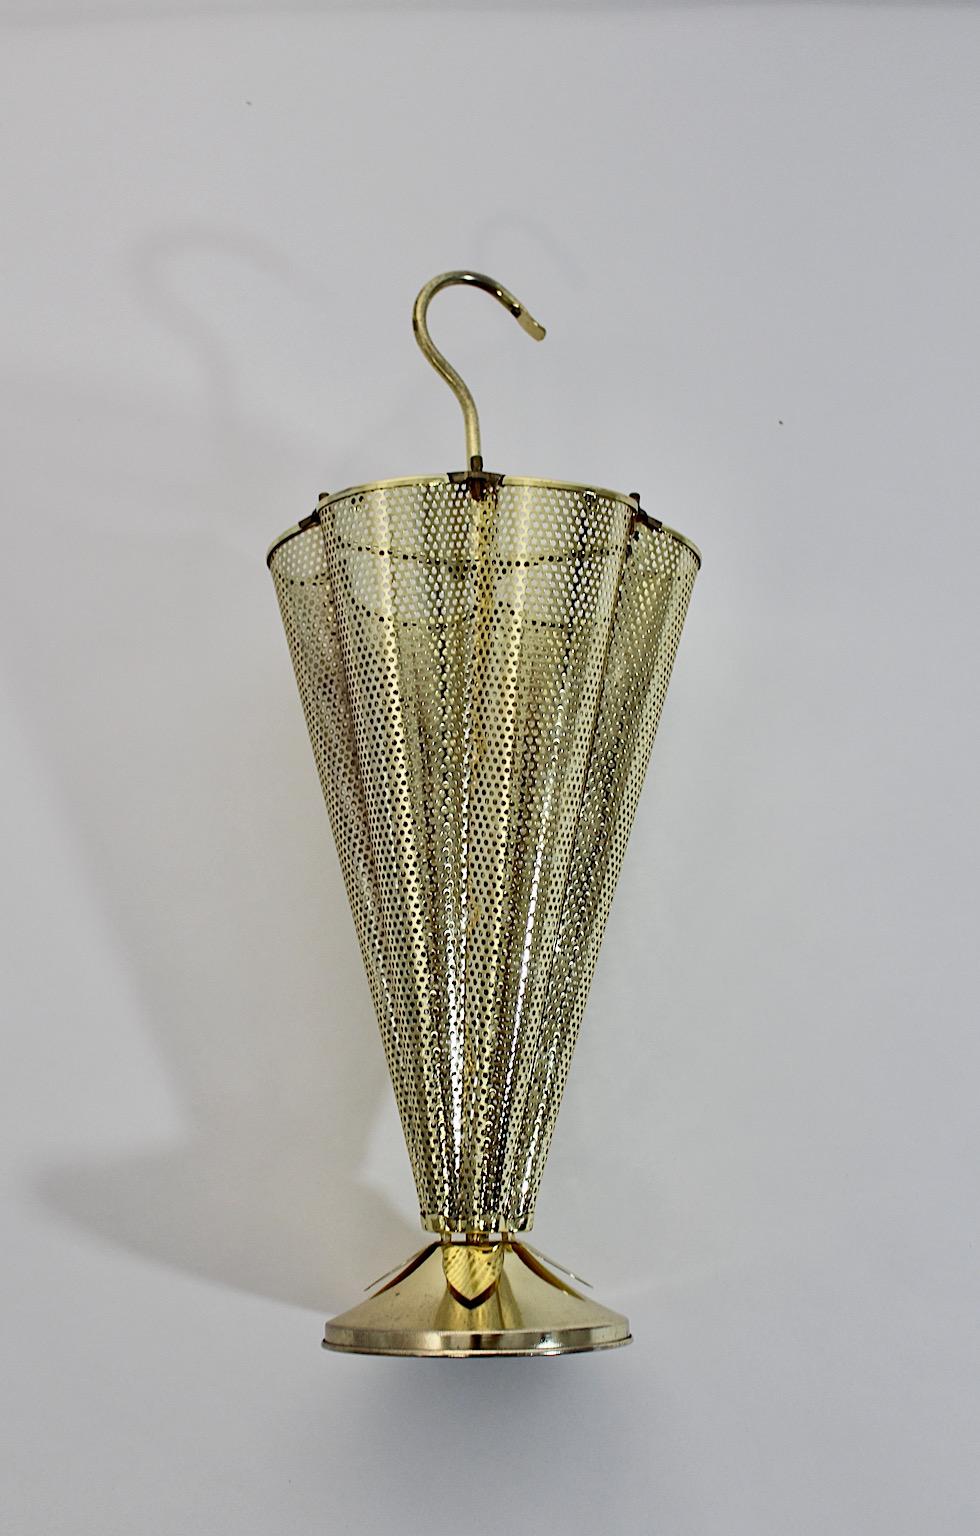 Mid Century Modern Style vintage umbrella stand or cane holder 1980s.
A fantastic golden brassed vintage umbrella stand or cane holder with a conical shaped body from perforated brassed iron formed like an umbrella.
With a circular base decorated